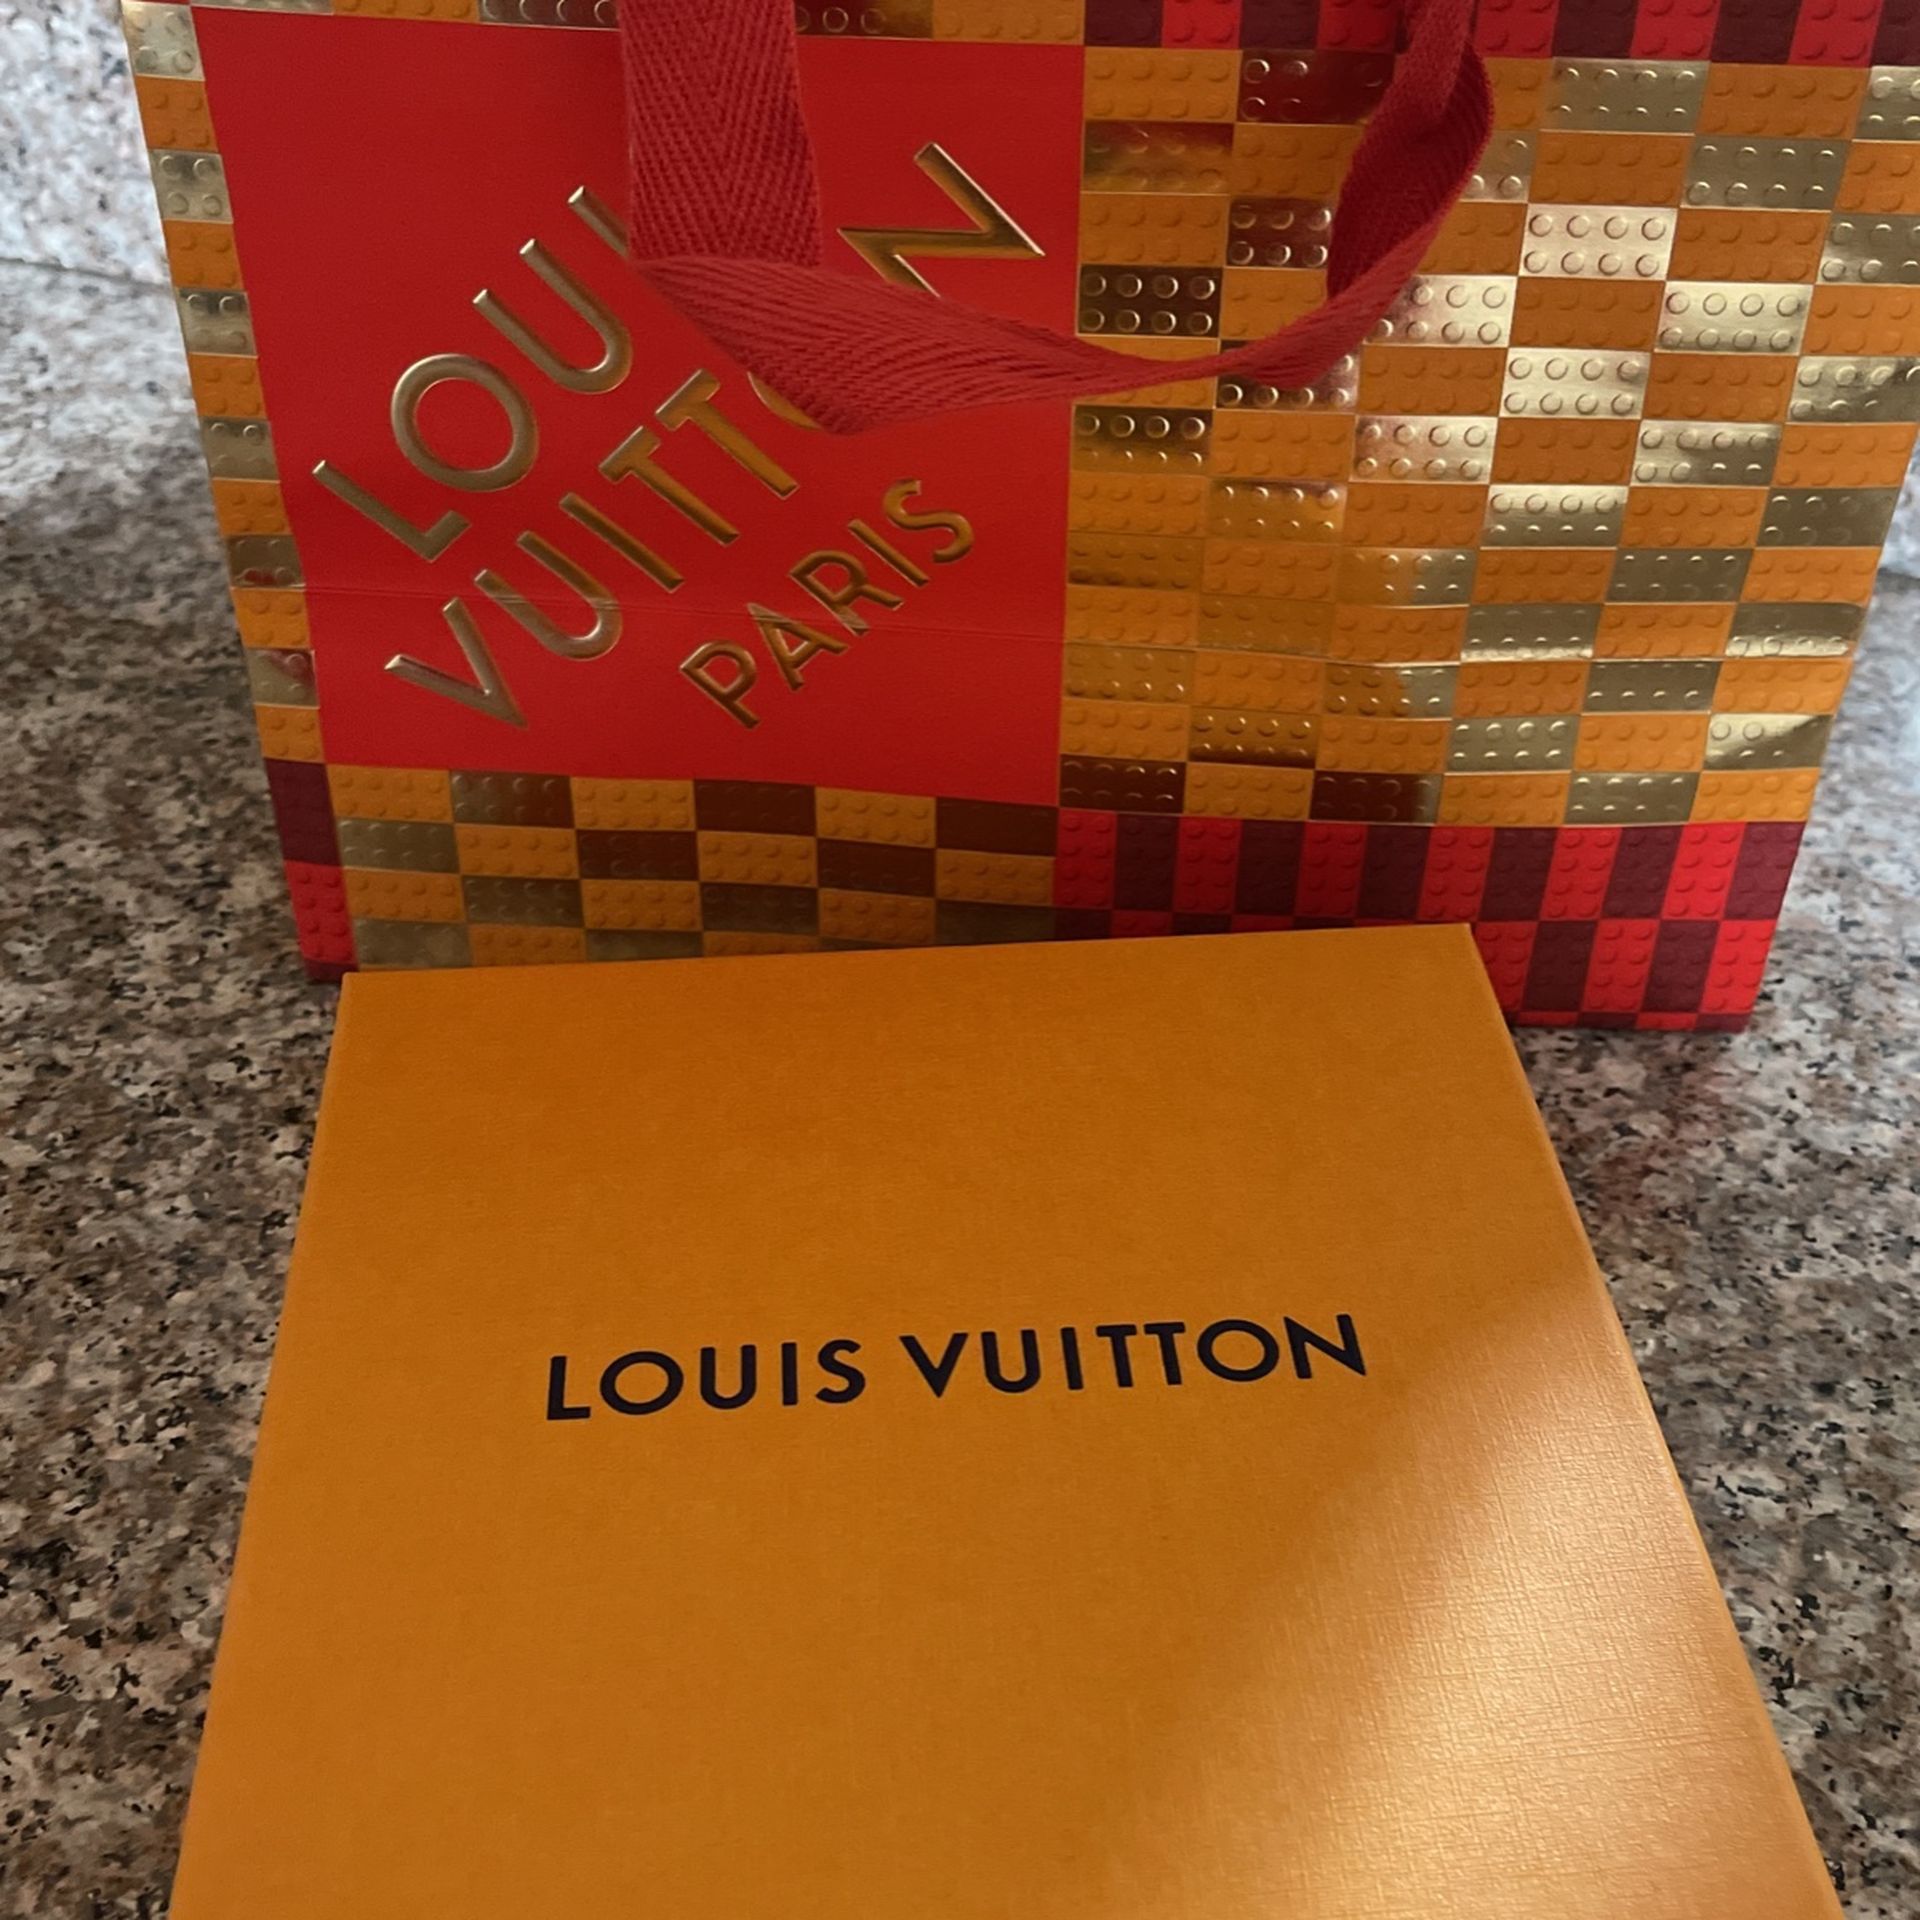 Louis Vuitton Gift Box And Gift Bag for Sale in El Monte, CA - OfferUp